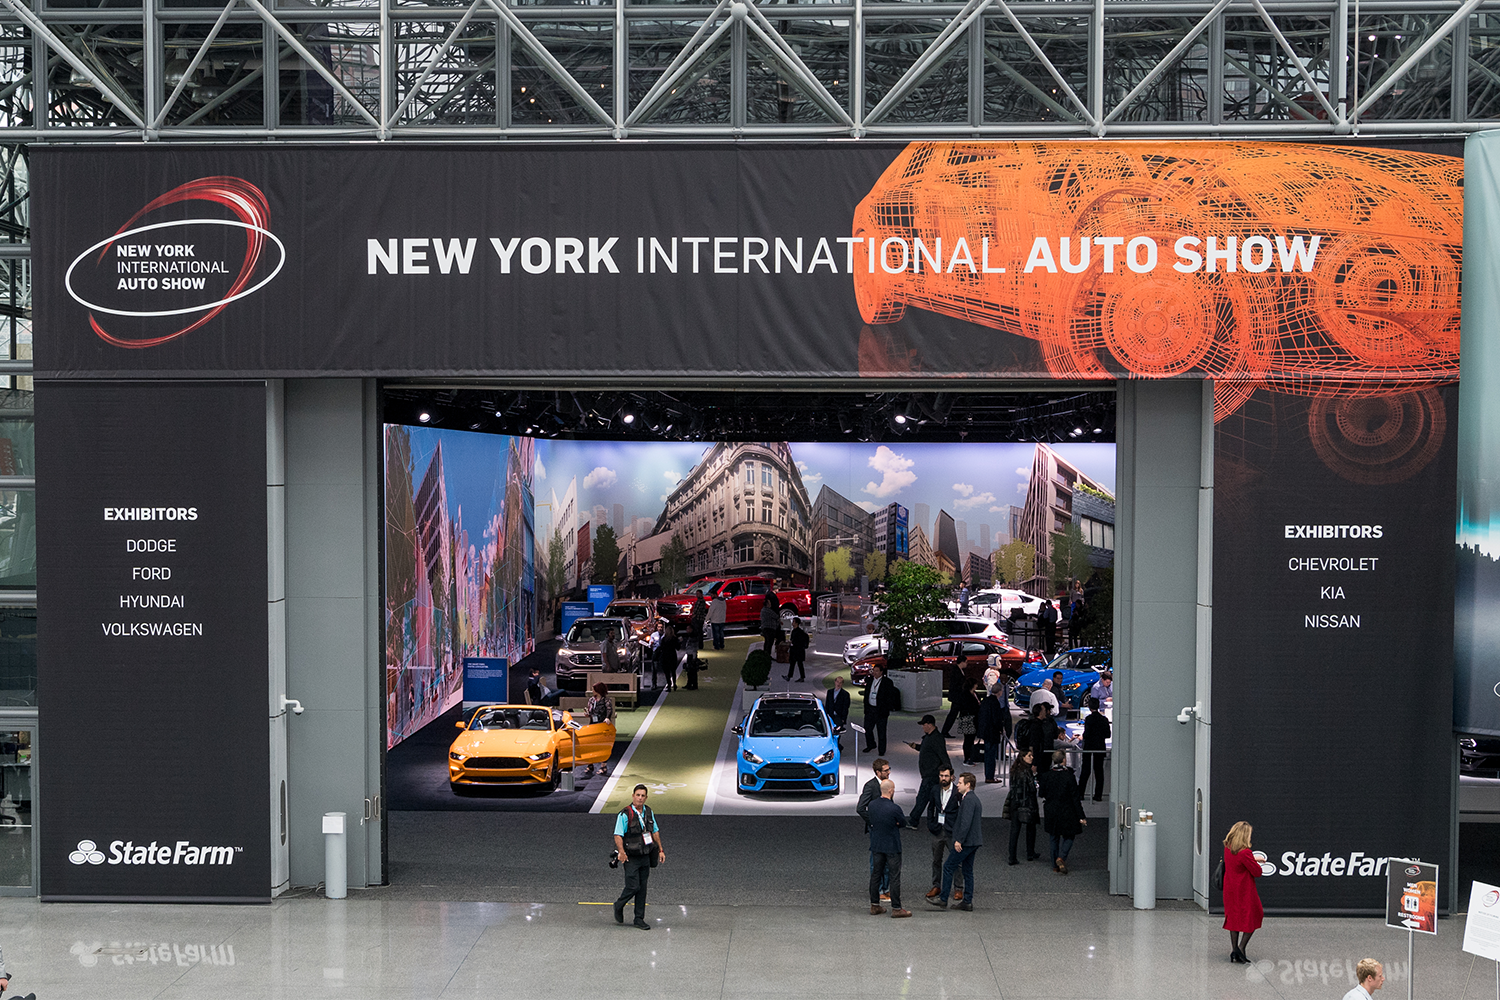 The entrance to an auto show in New York City